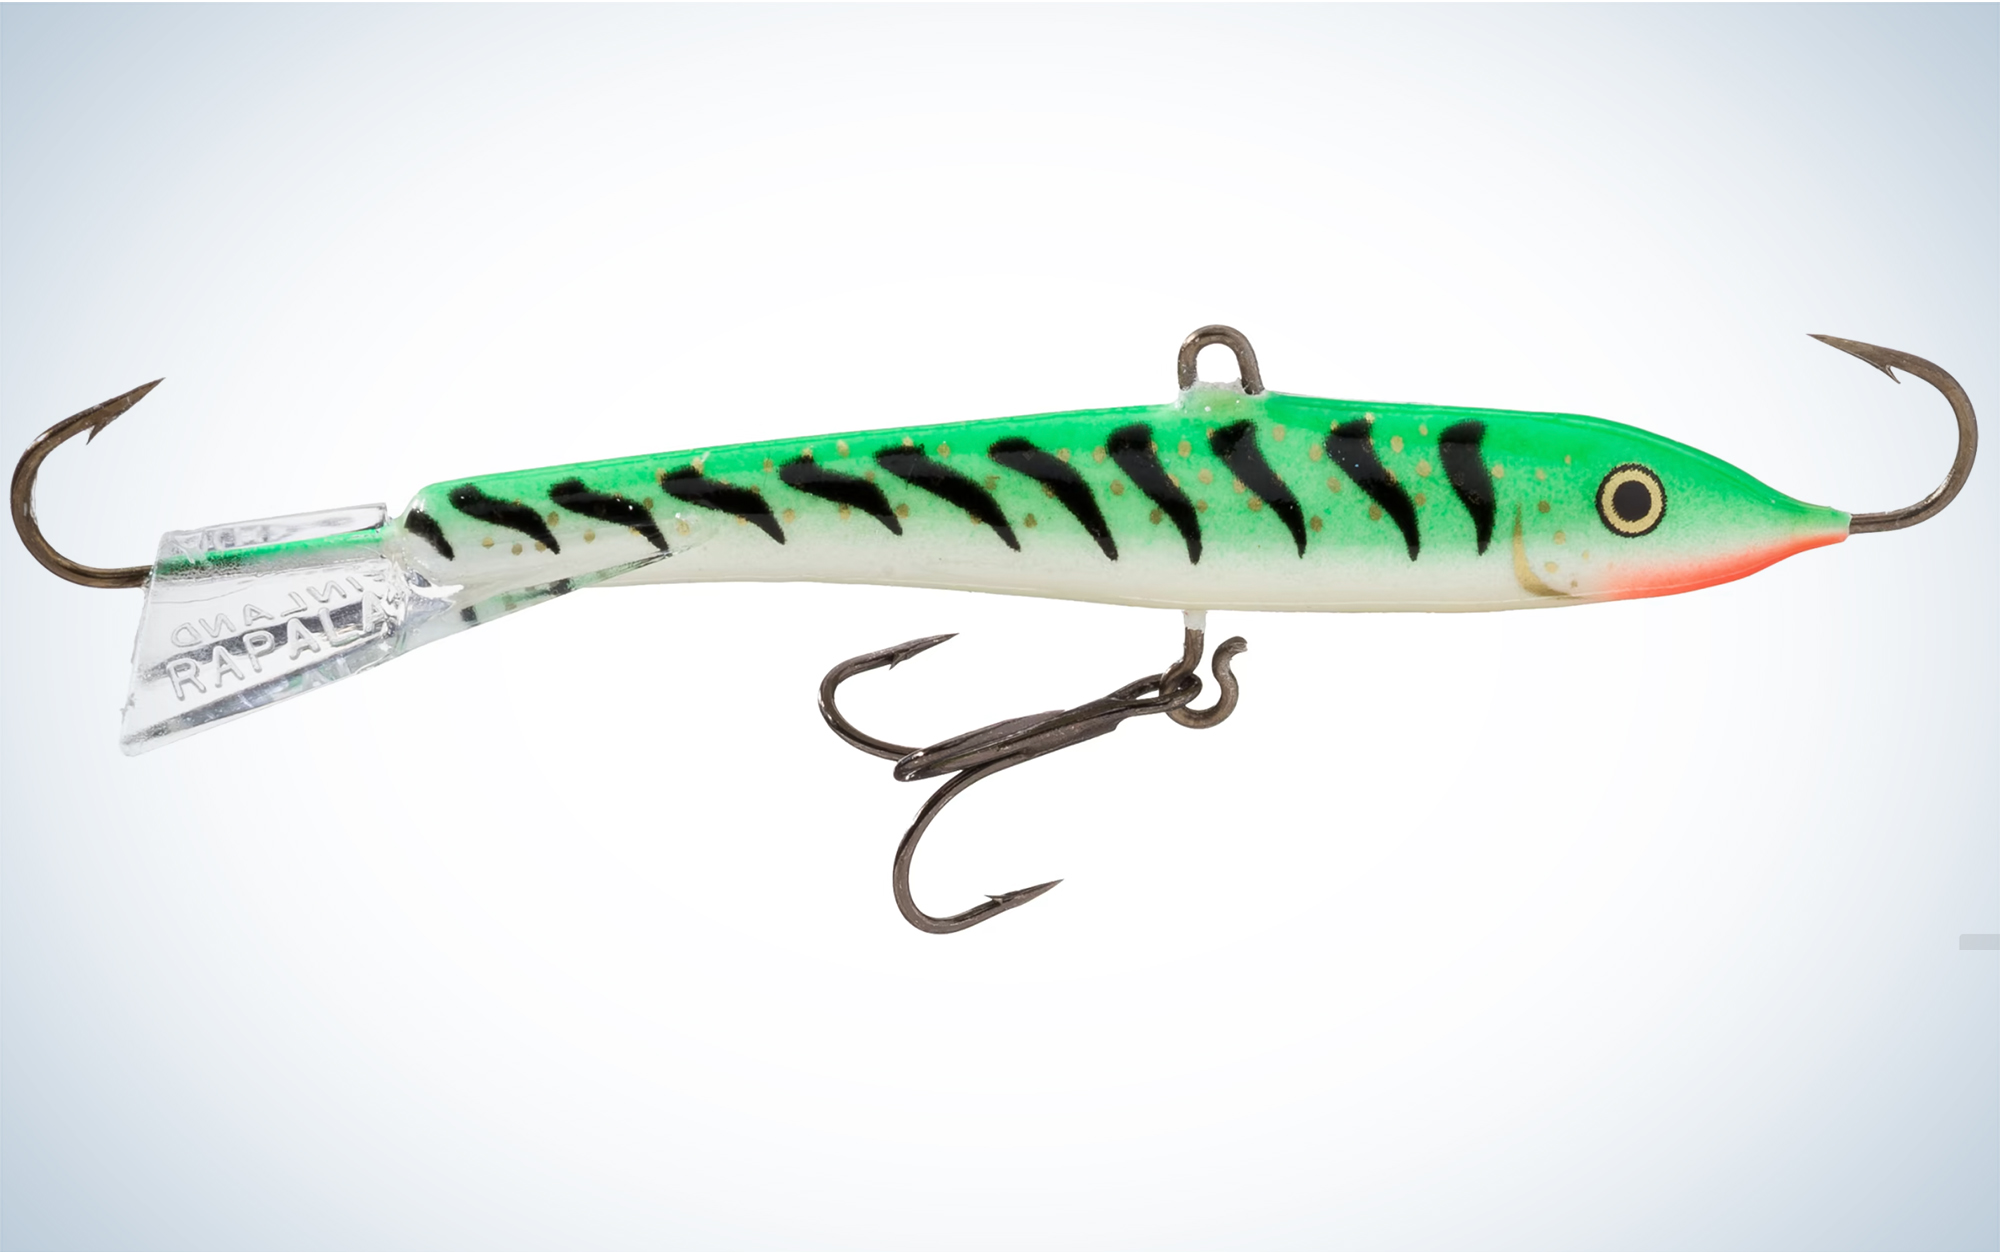 Rapala #3 Jigging Rap is one of the best ice fishing lures for perch.